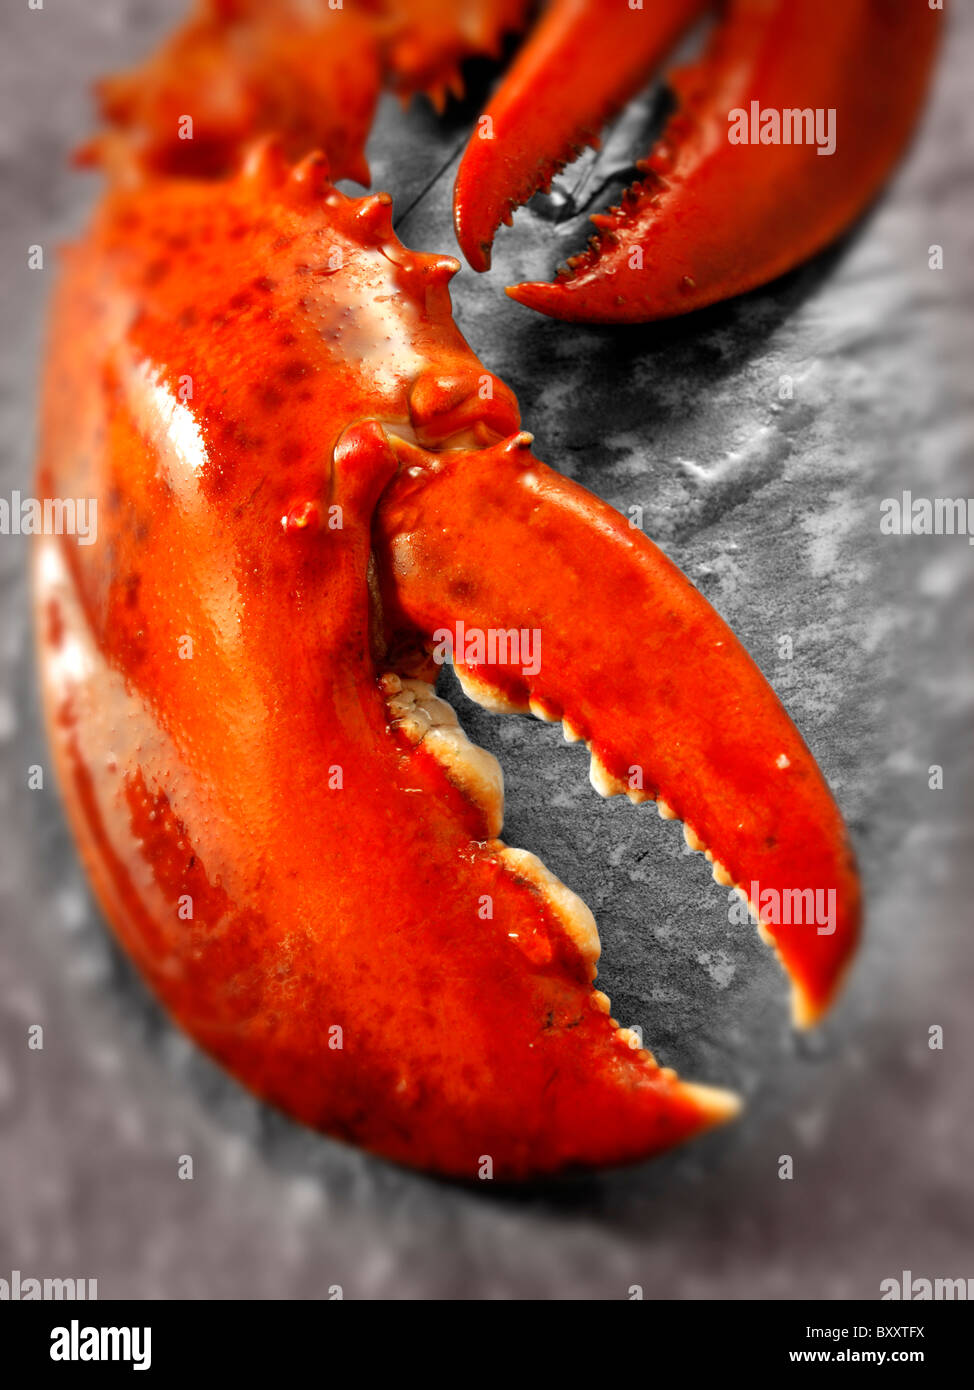 Fresh cooked whole lobster claws Stock Photo